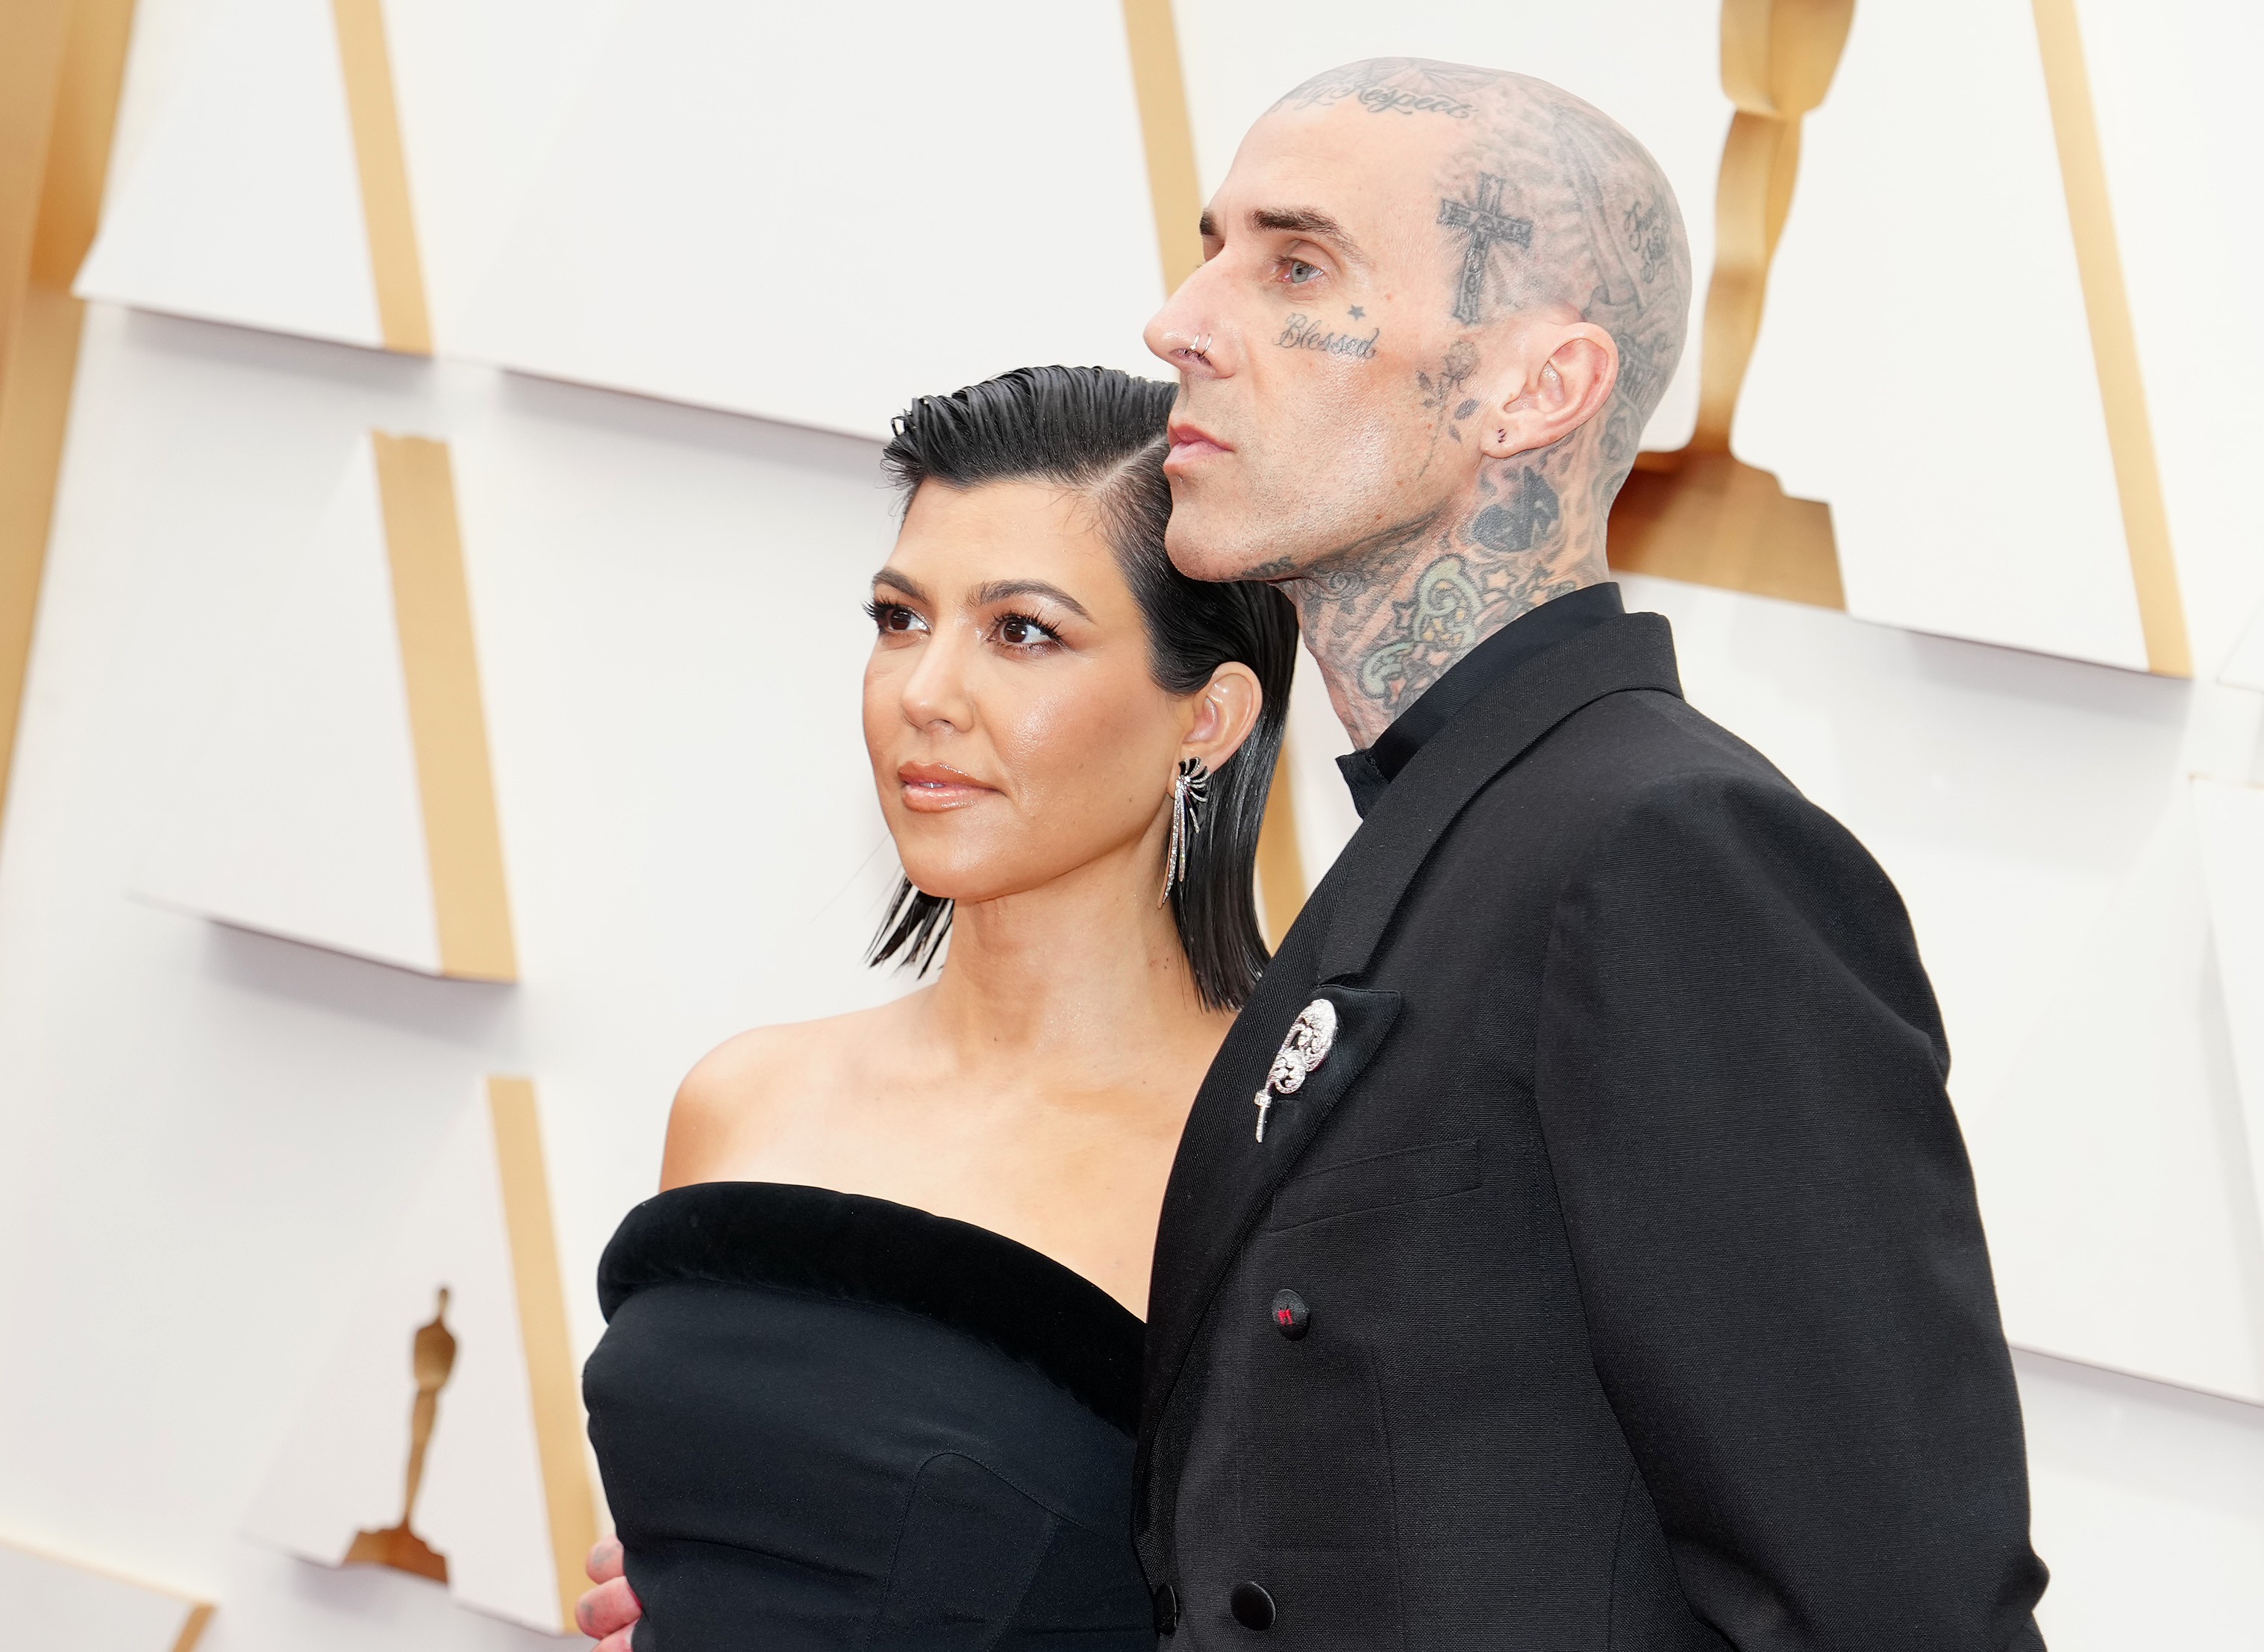 HOLLYWOOD, CALIFORNIA - MARCH 27: (L-R) Kourtney Kardashian and Travis Barker attend the 94th Annual Academy Awards at Hollywood and Highland on March 27, 2022 in Hollywood, California. (Photo by Jeff Kravitz/FilmMagic) (Foto: FilmMagic)